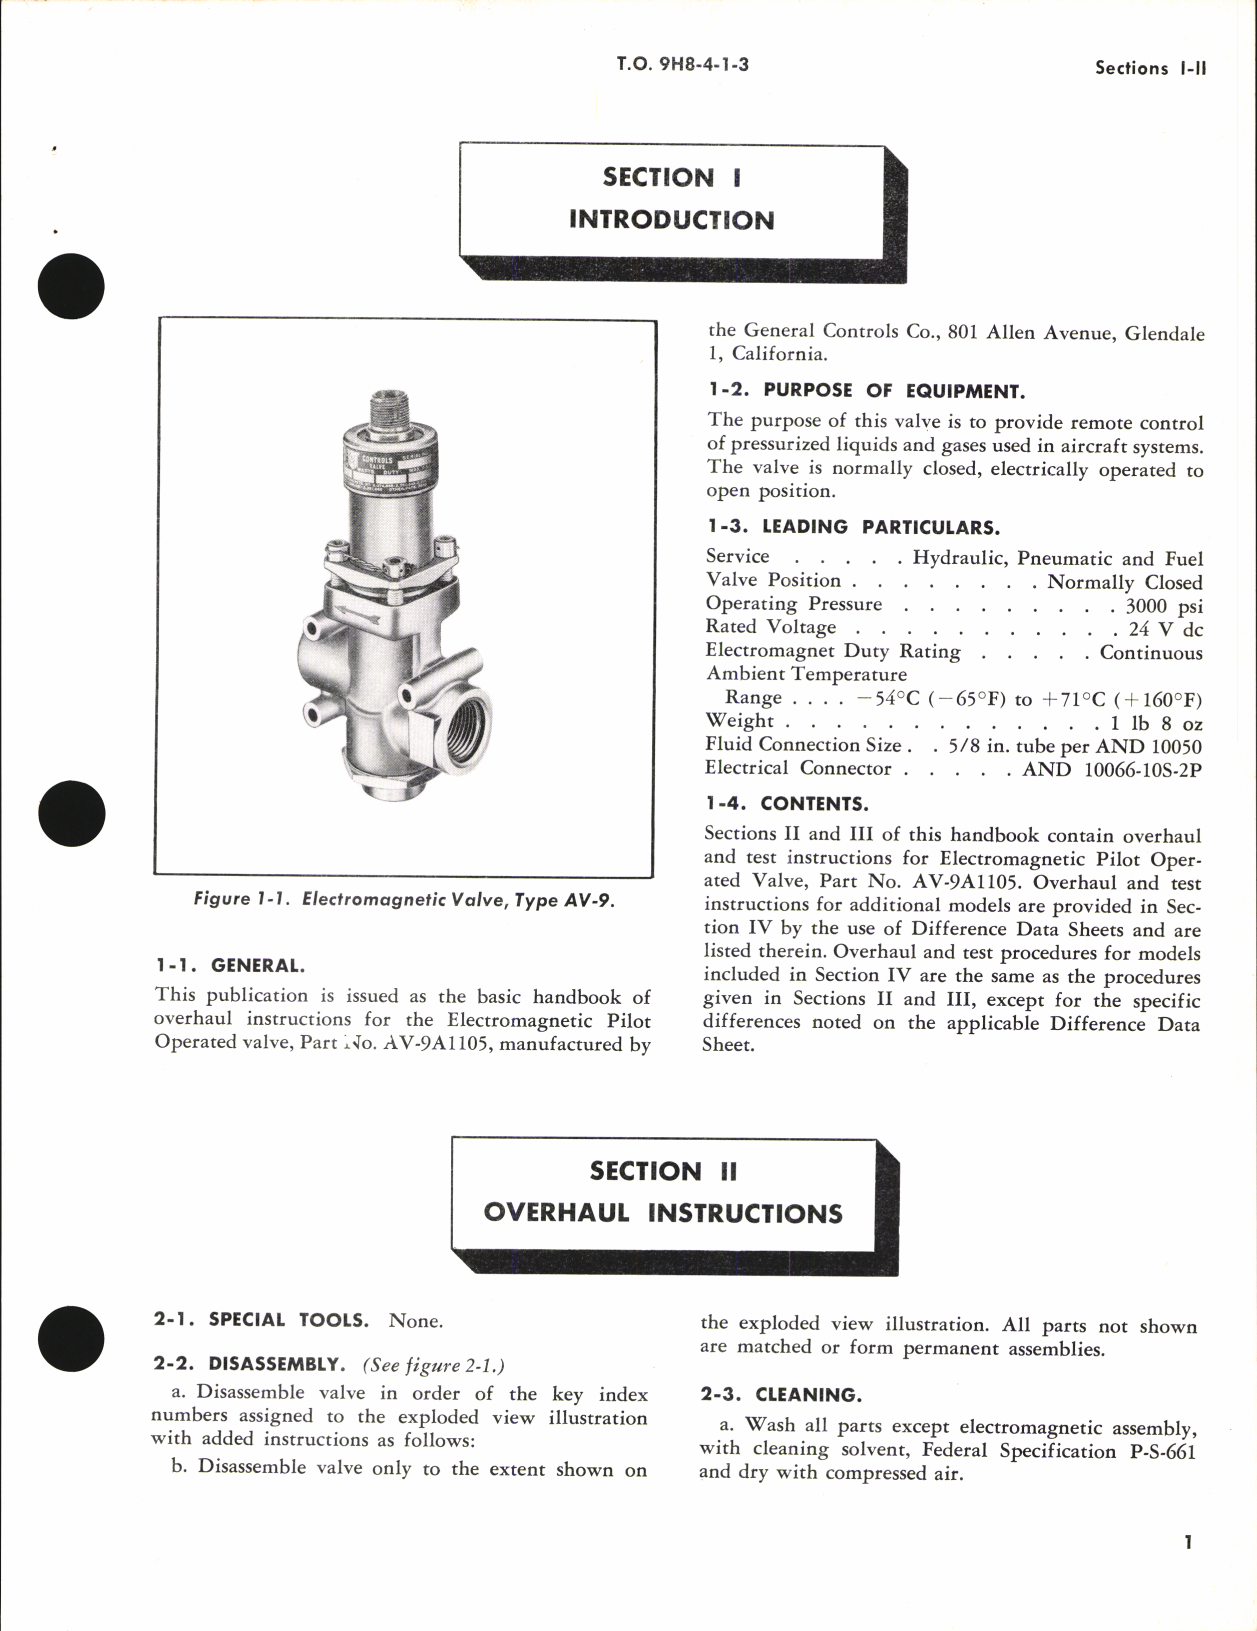 Sample page 5 from AirCorps Library document: Overhaul Instructions for Electromagnetic Pilot Operated Valve Av-9 Series, Part no. Av-9A1105 and Similar Valves